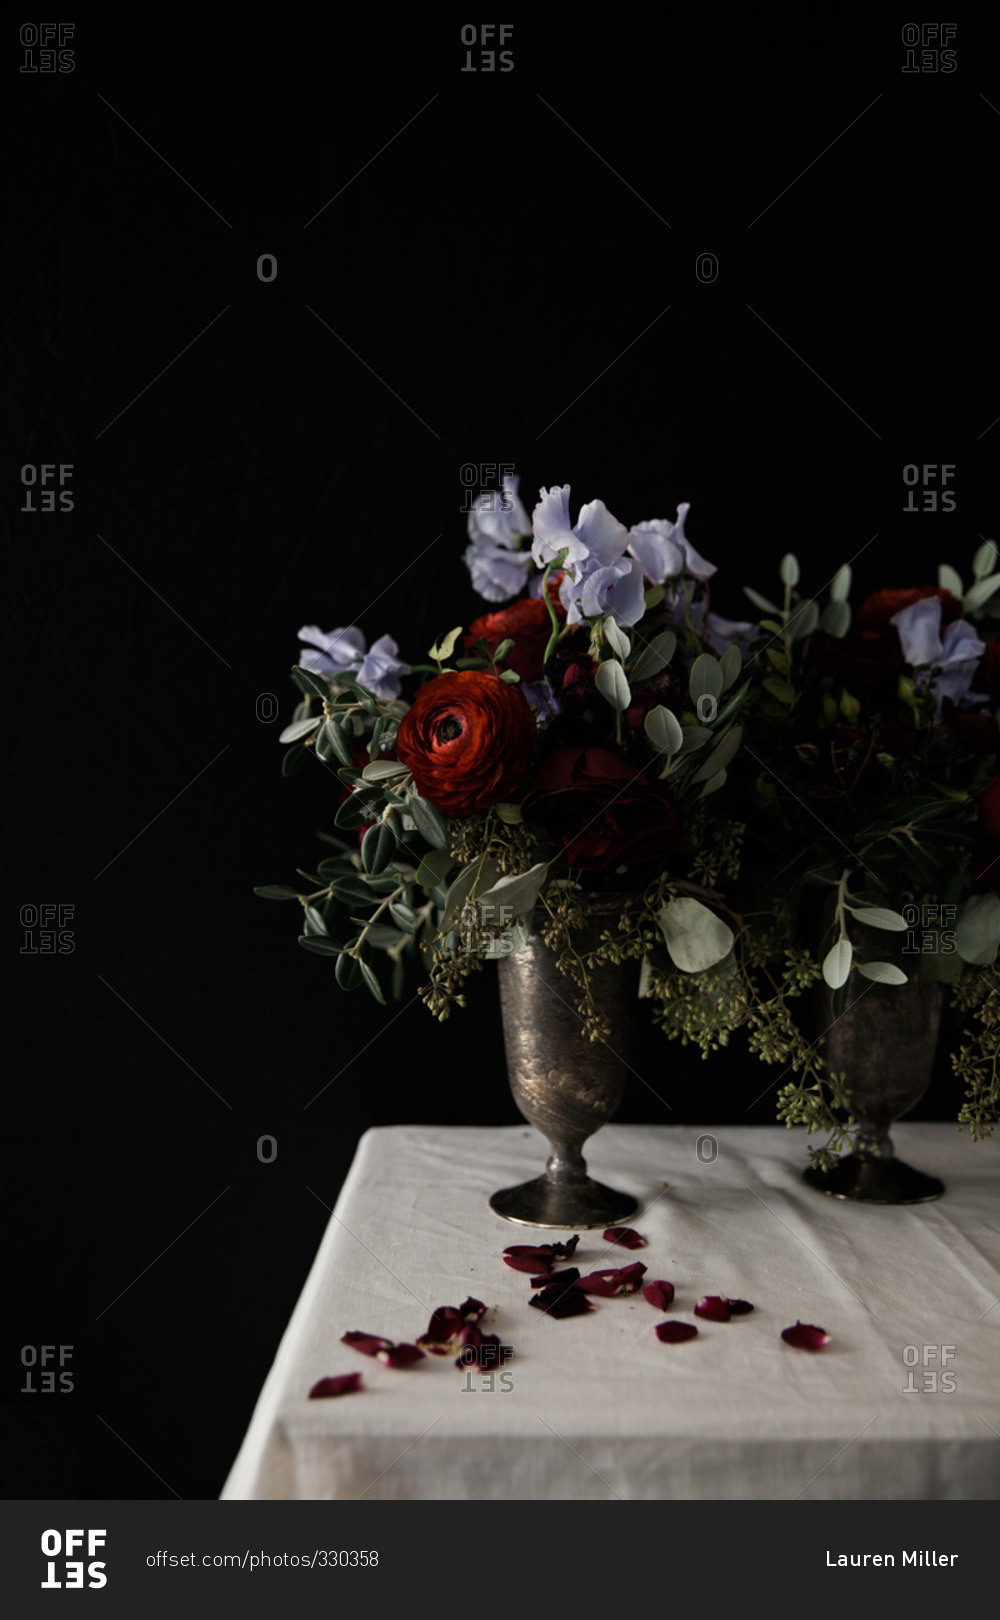 Still life with vases holding roses and purple flowers beside rose petals on a white tablecloth